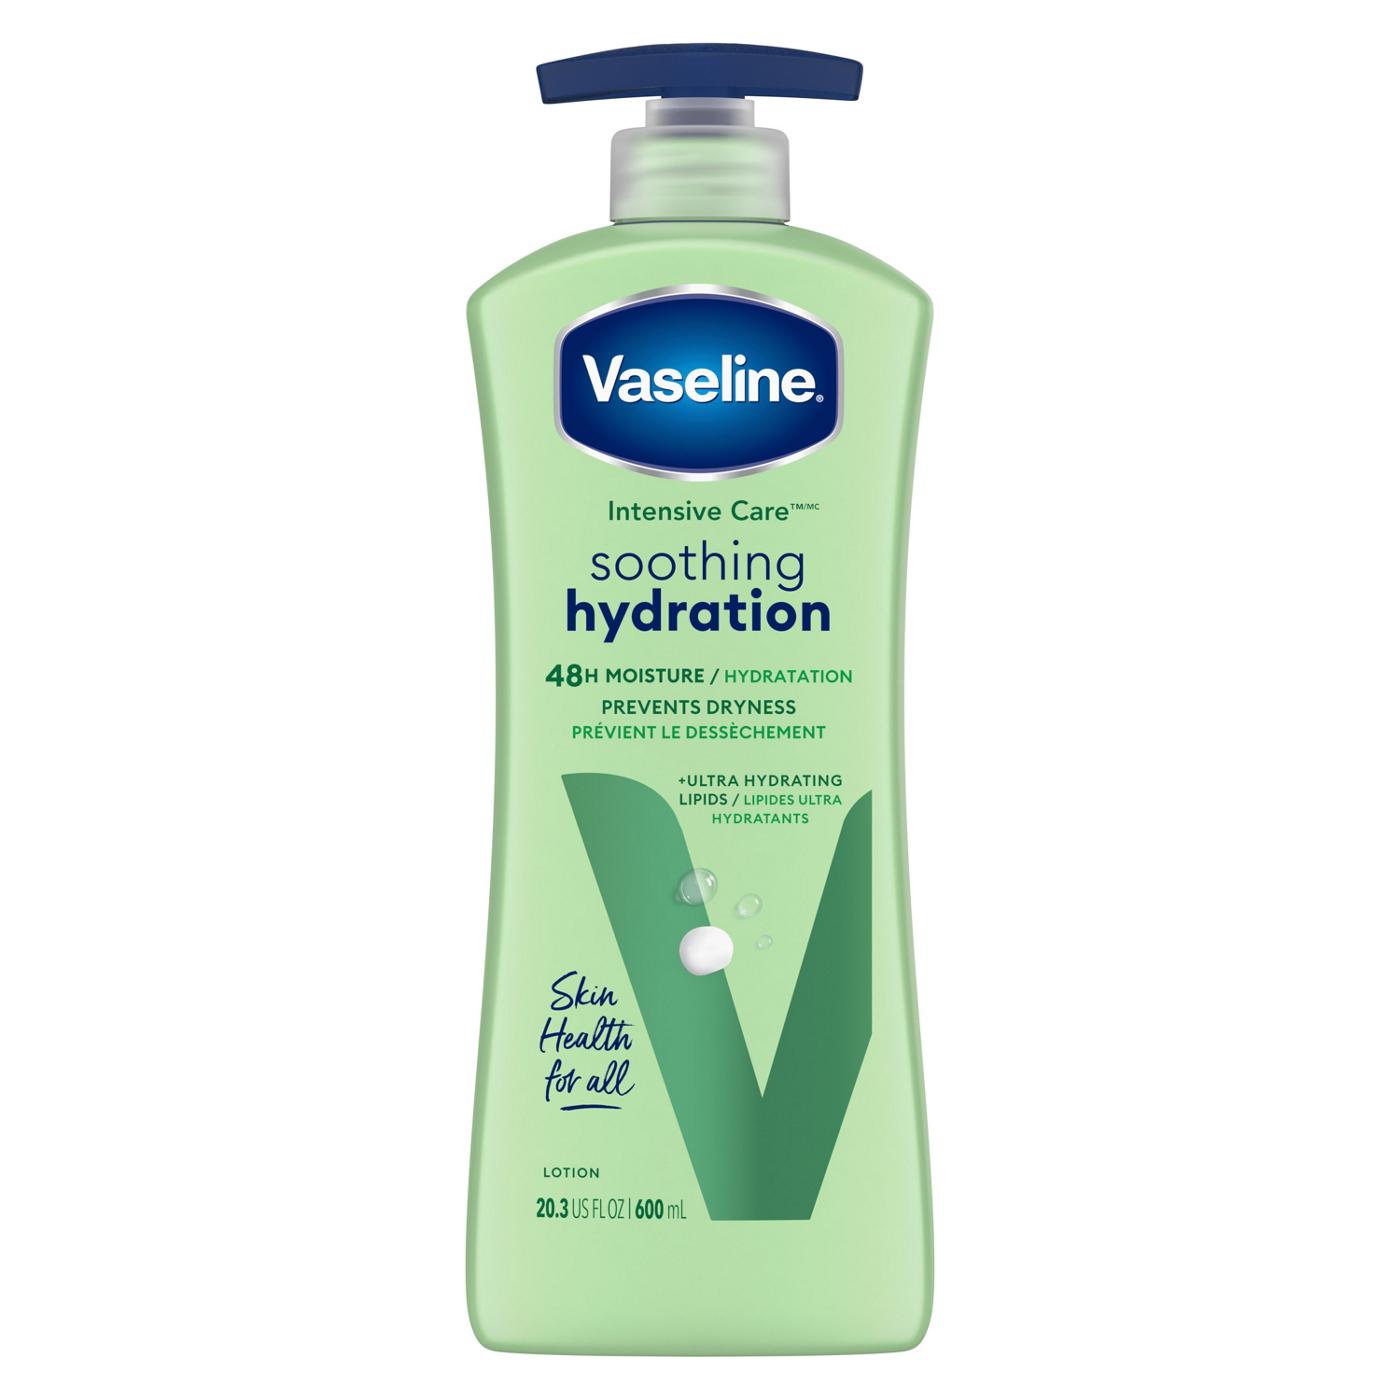 Vaseline Intensive Care Soothing Hydration Body Lotion; image 1 of 10